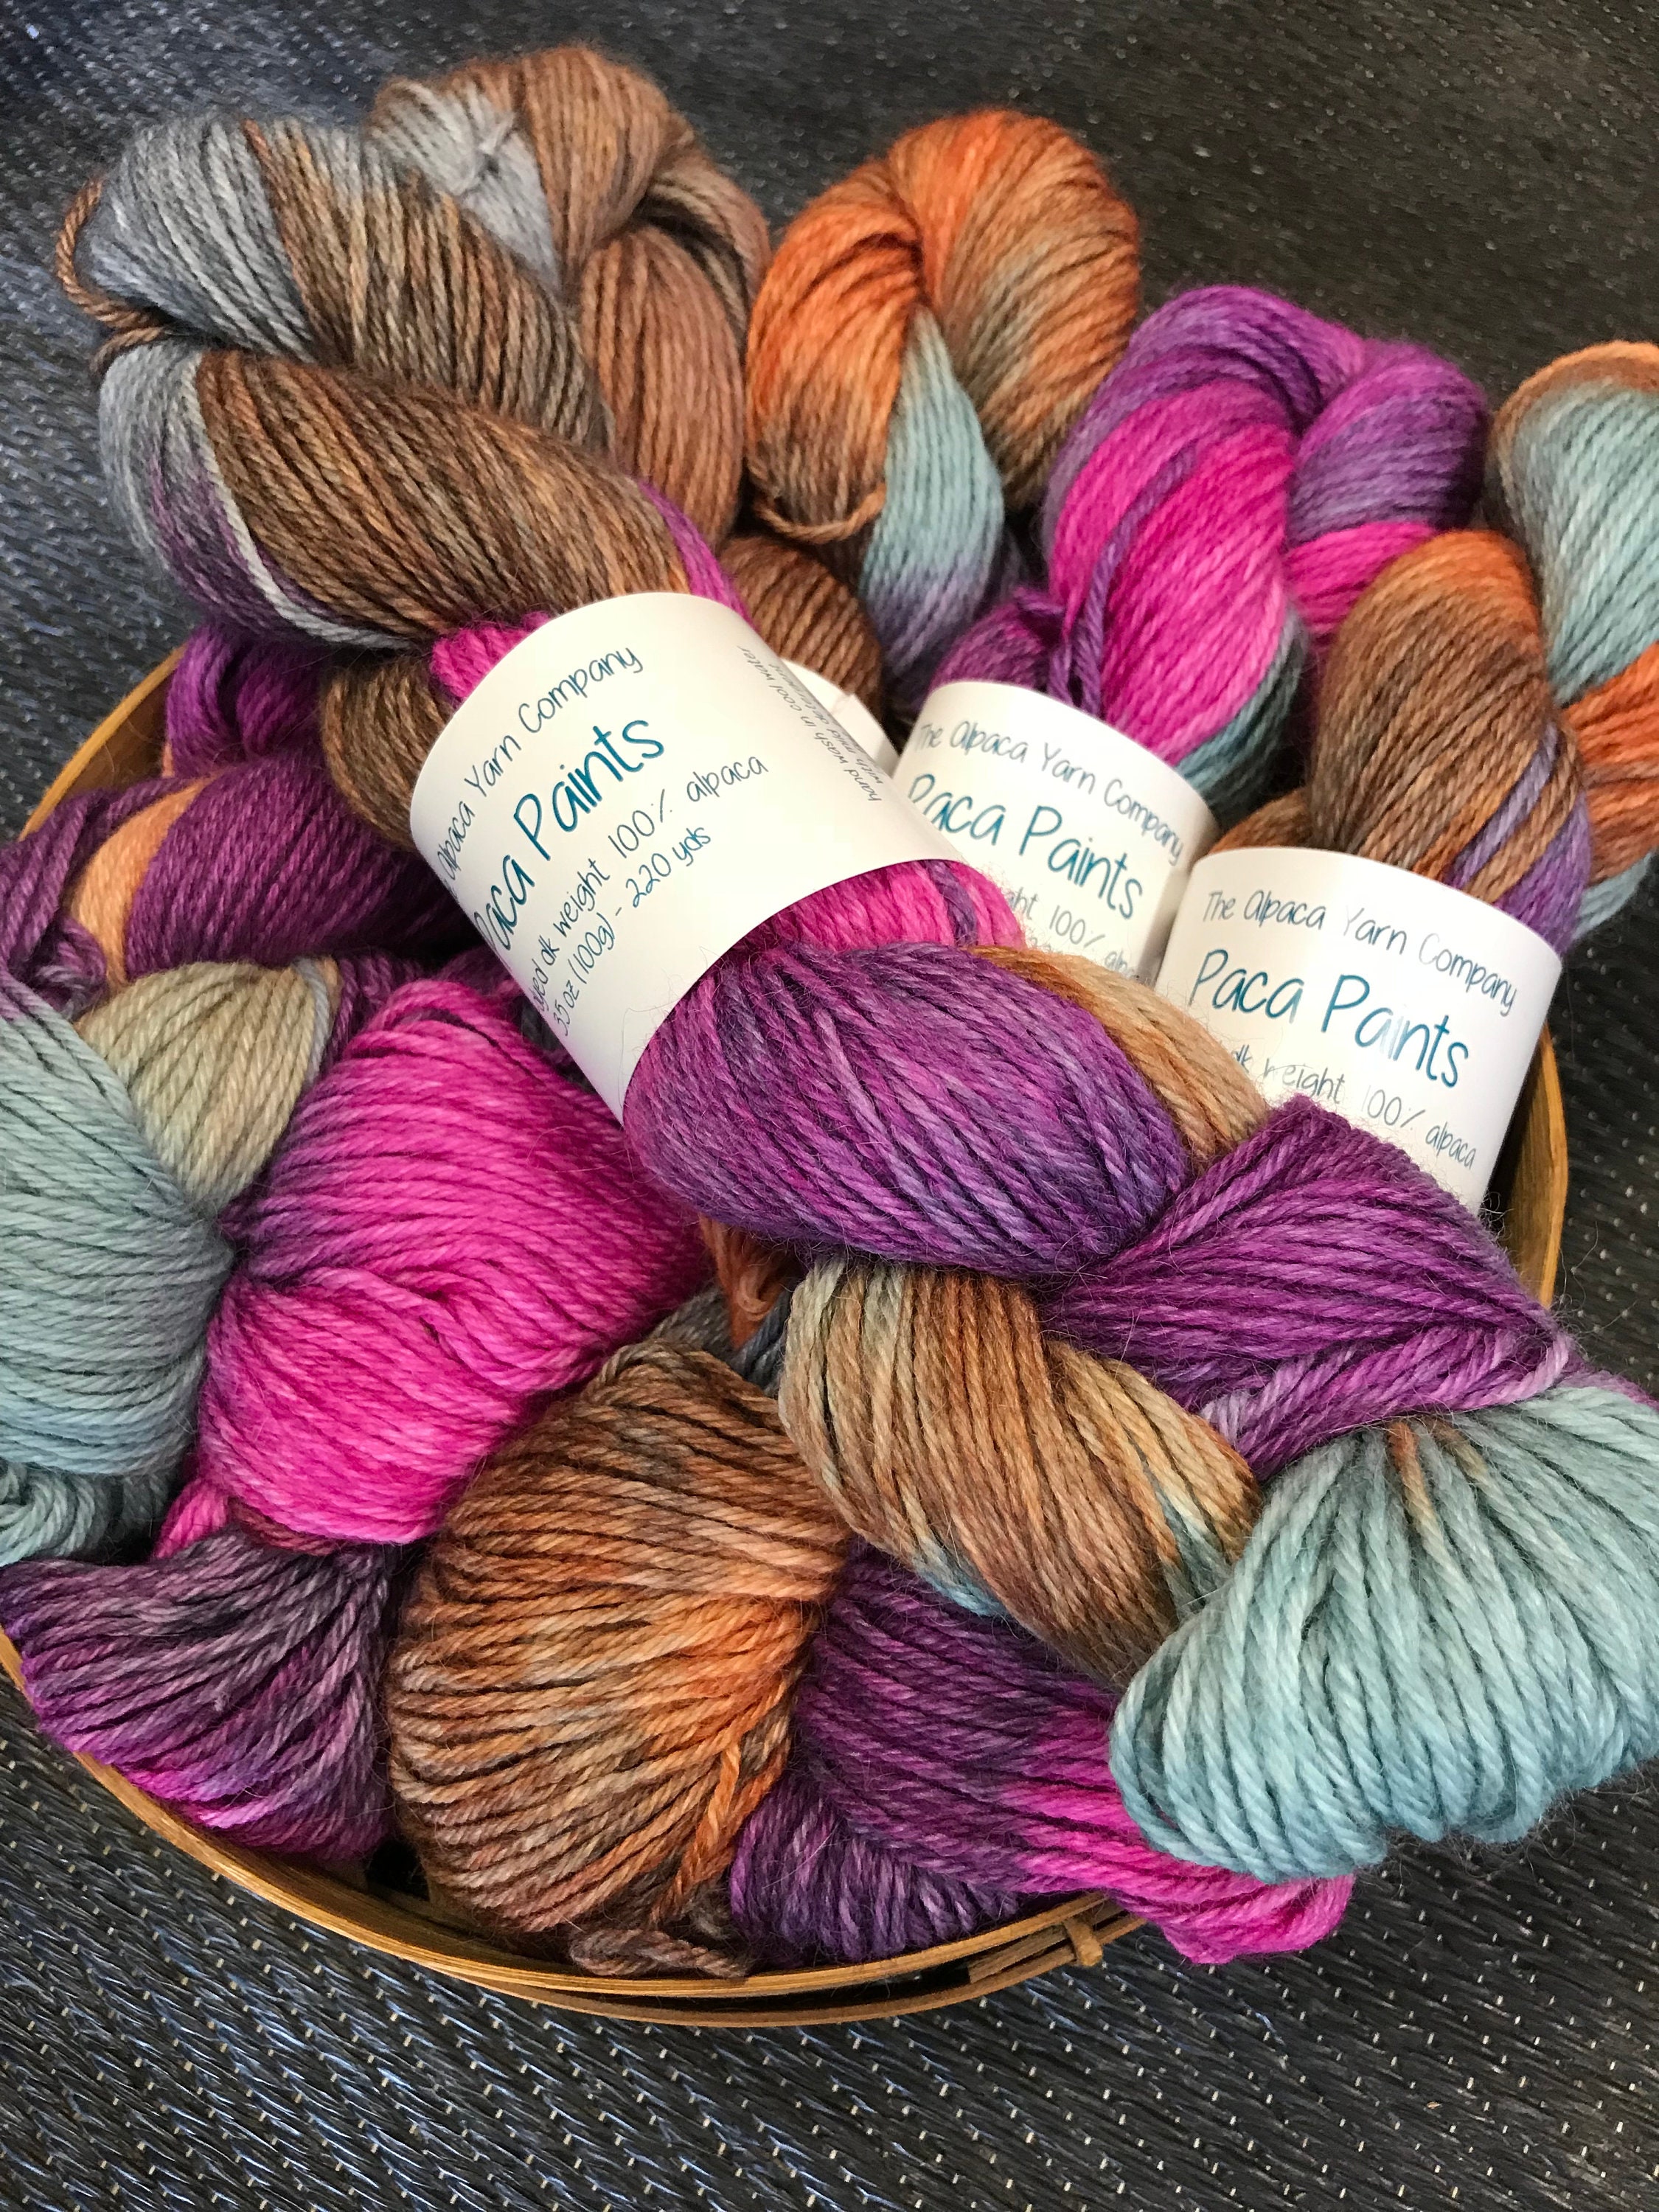 FUNKY – Cheviot Dyed-in-the-Wool DK Yarn